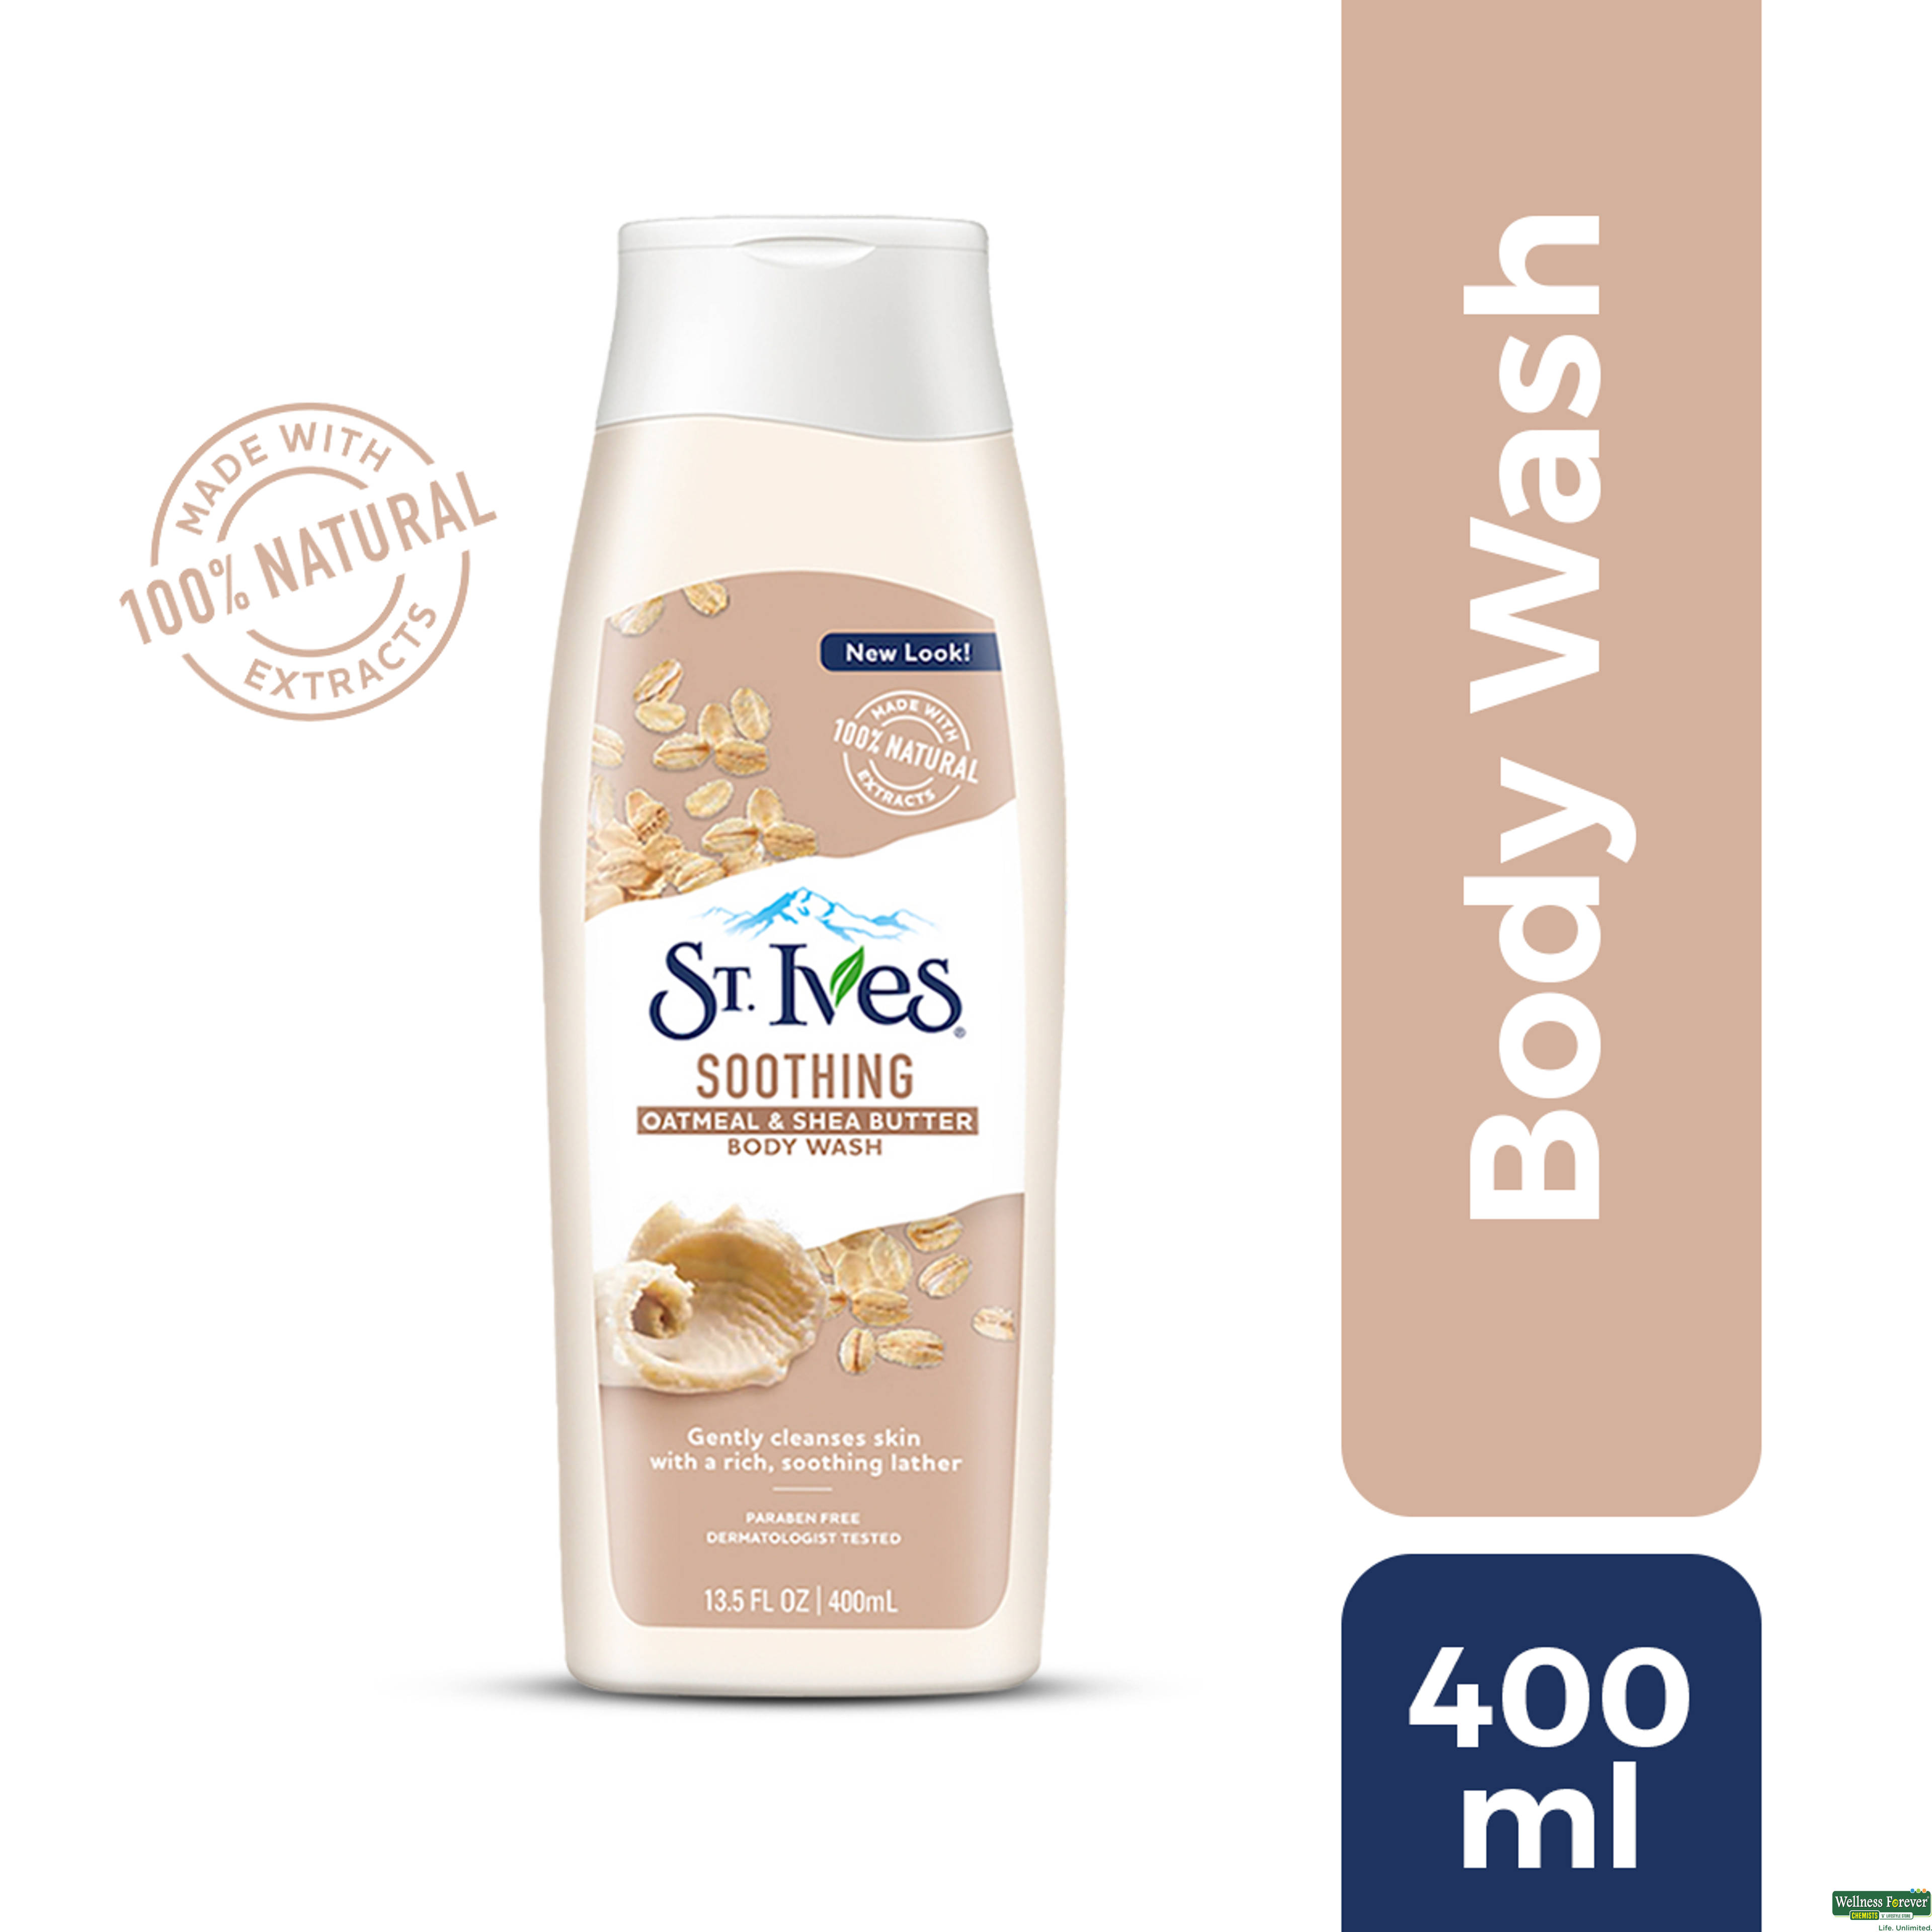 St. Ives Soothing Oatmeal & Shea Butter Body Wash, 400 ml-image